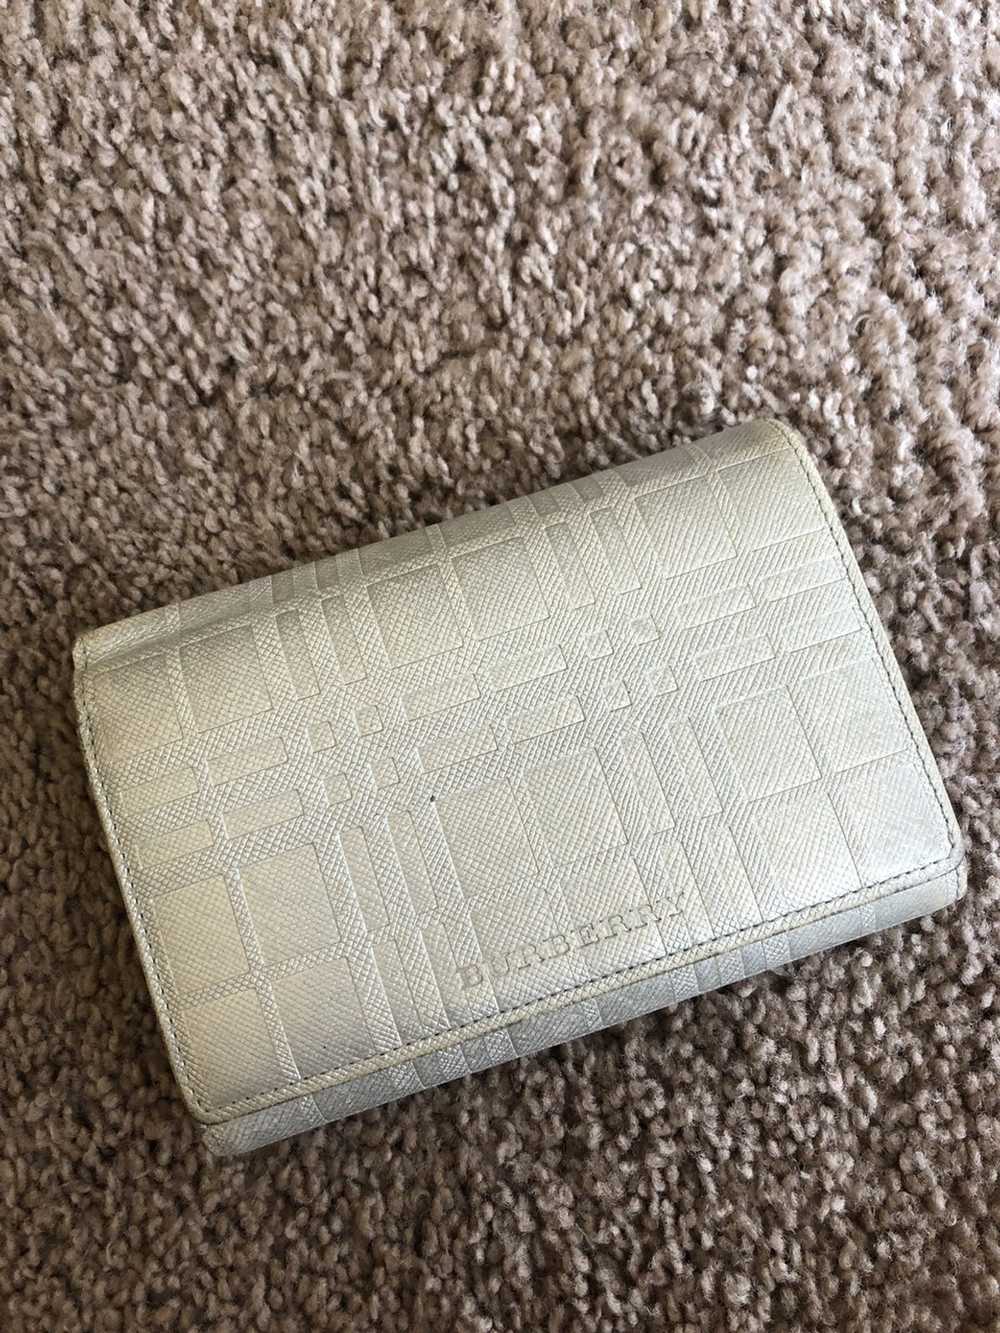 Burberry Burberry leather check trifold wallet - image 2